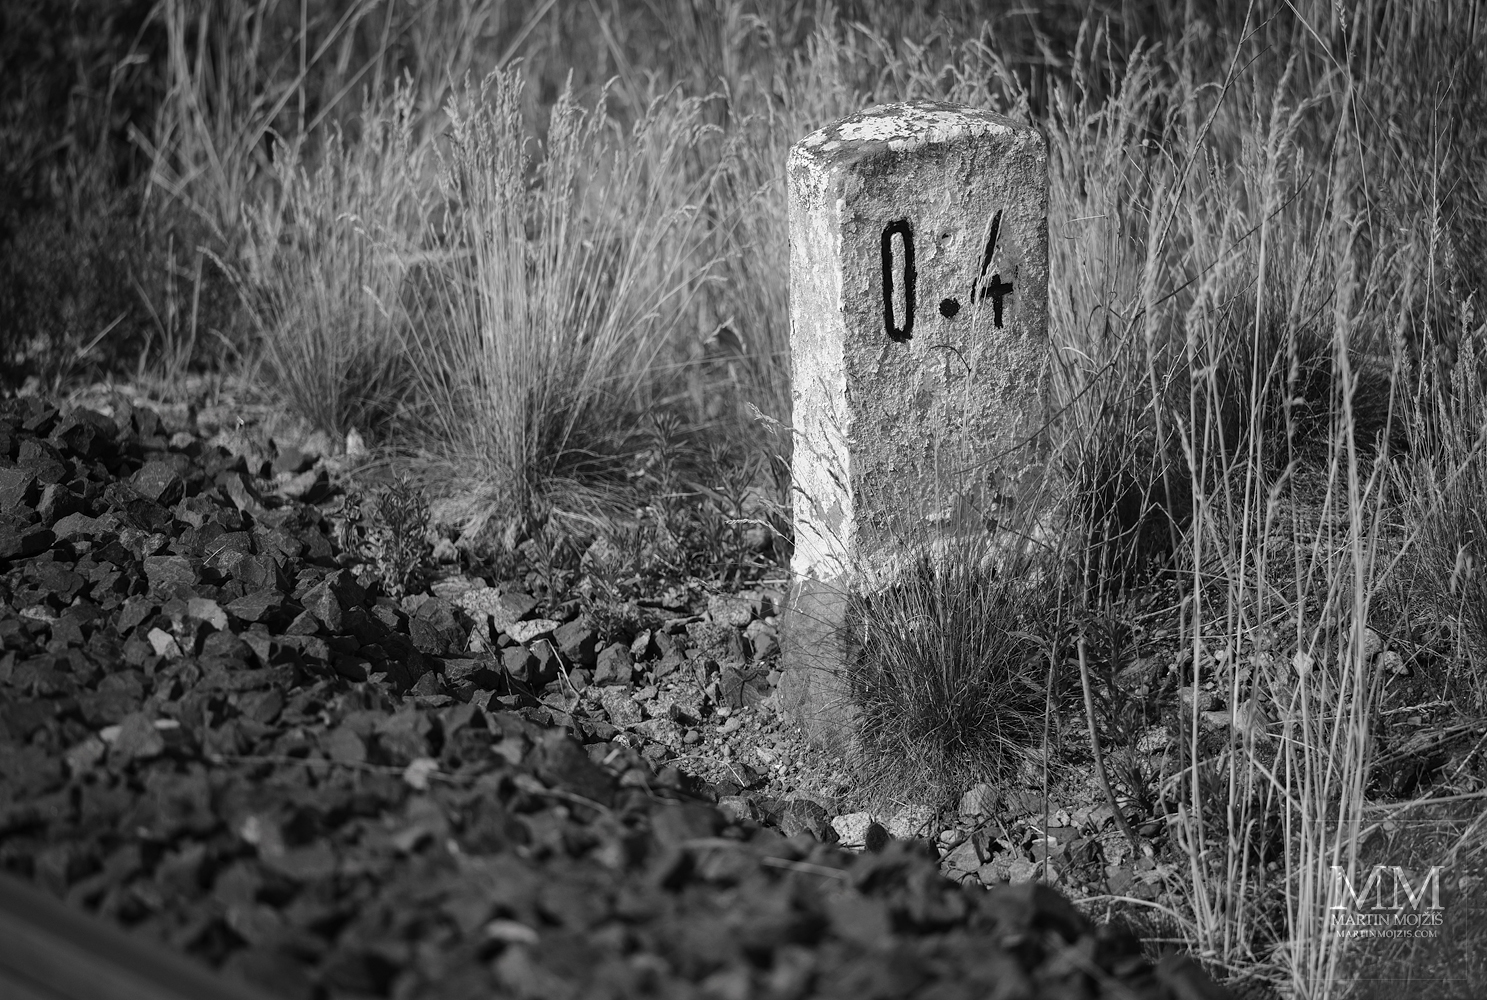 Railway hectometer in the tall grass. Fine art black and white photograph IN THE GRASSES III, photographed by Martin Mojzis.